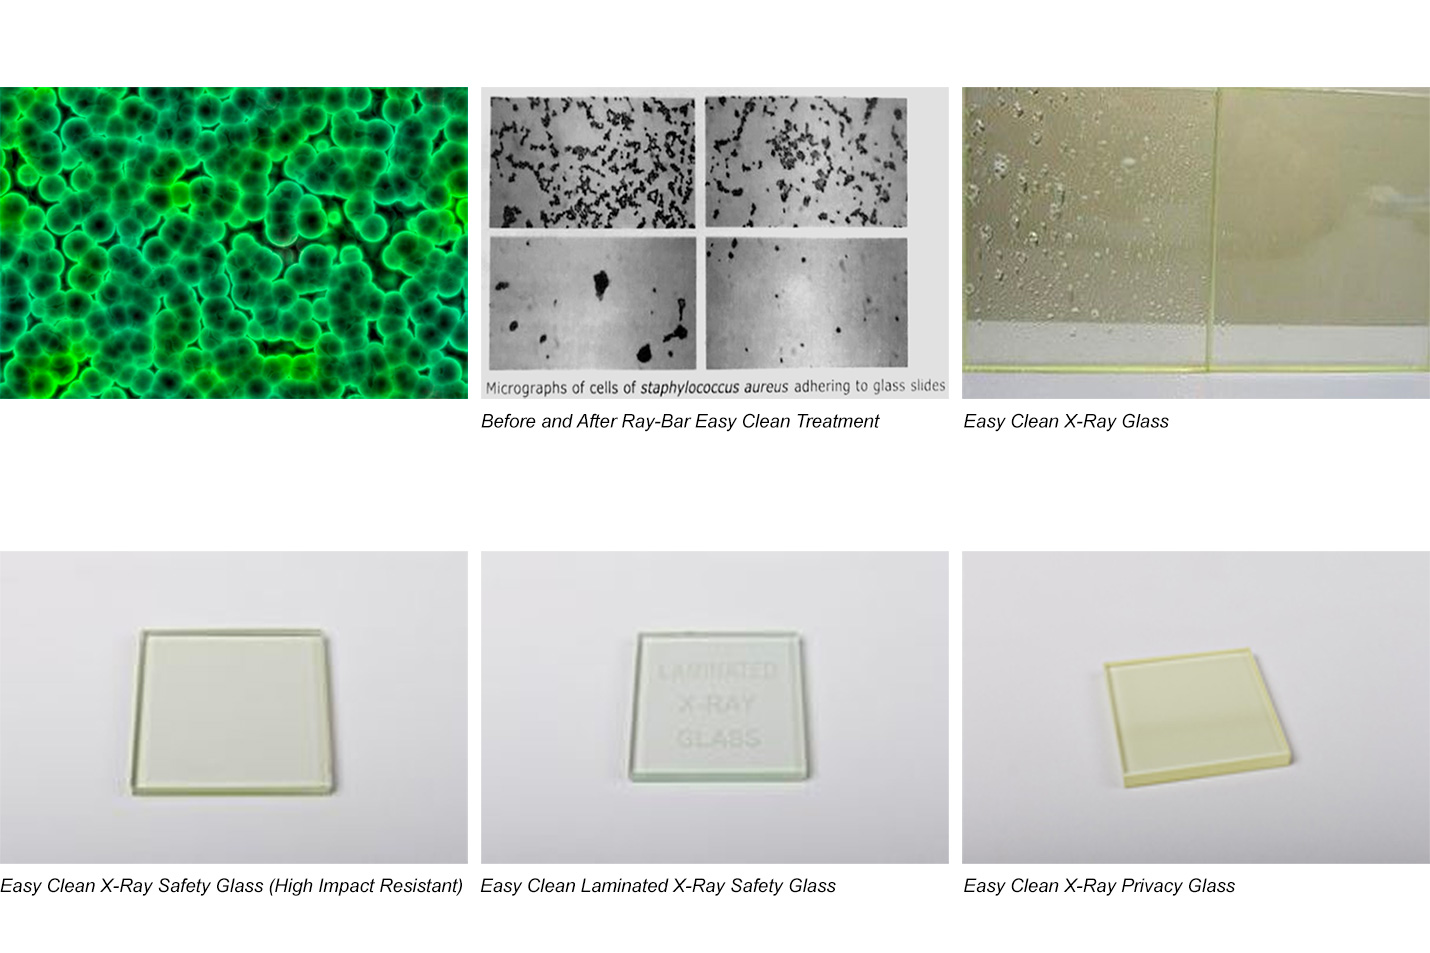 Easy-Clean X-Ray Glass provides x-ray protection from Alpha, Beta and Gamma Ionizing radiation for proper shielding of medical diagnostic imaging procedures